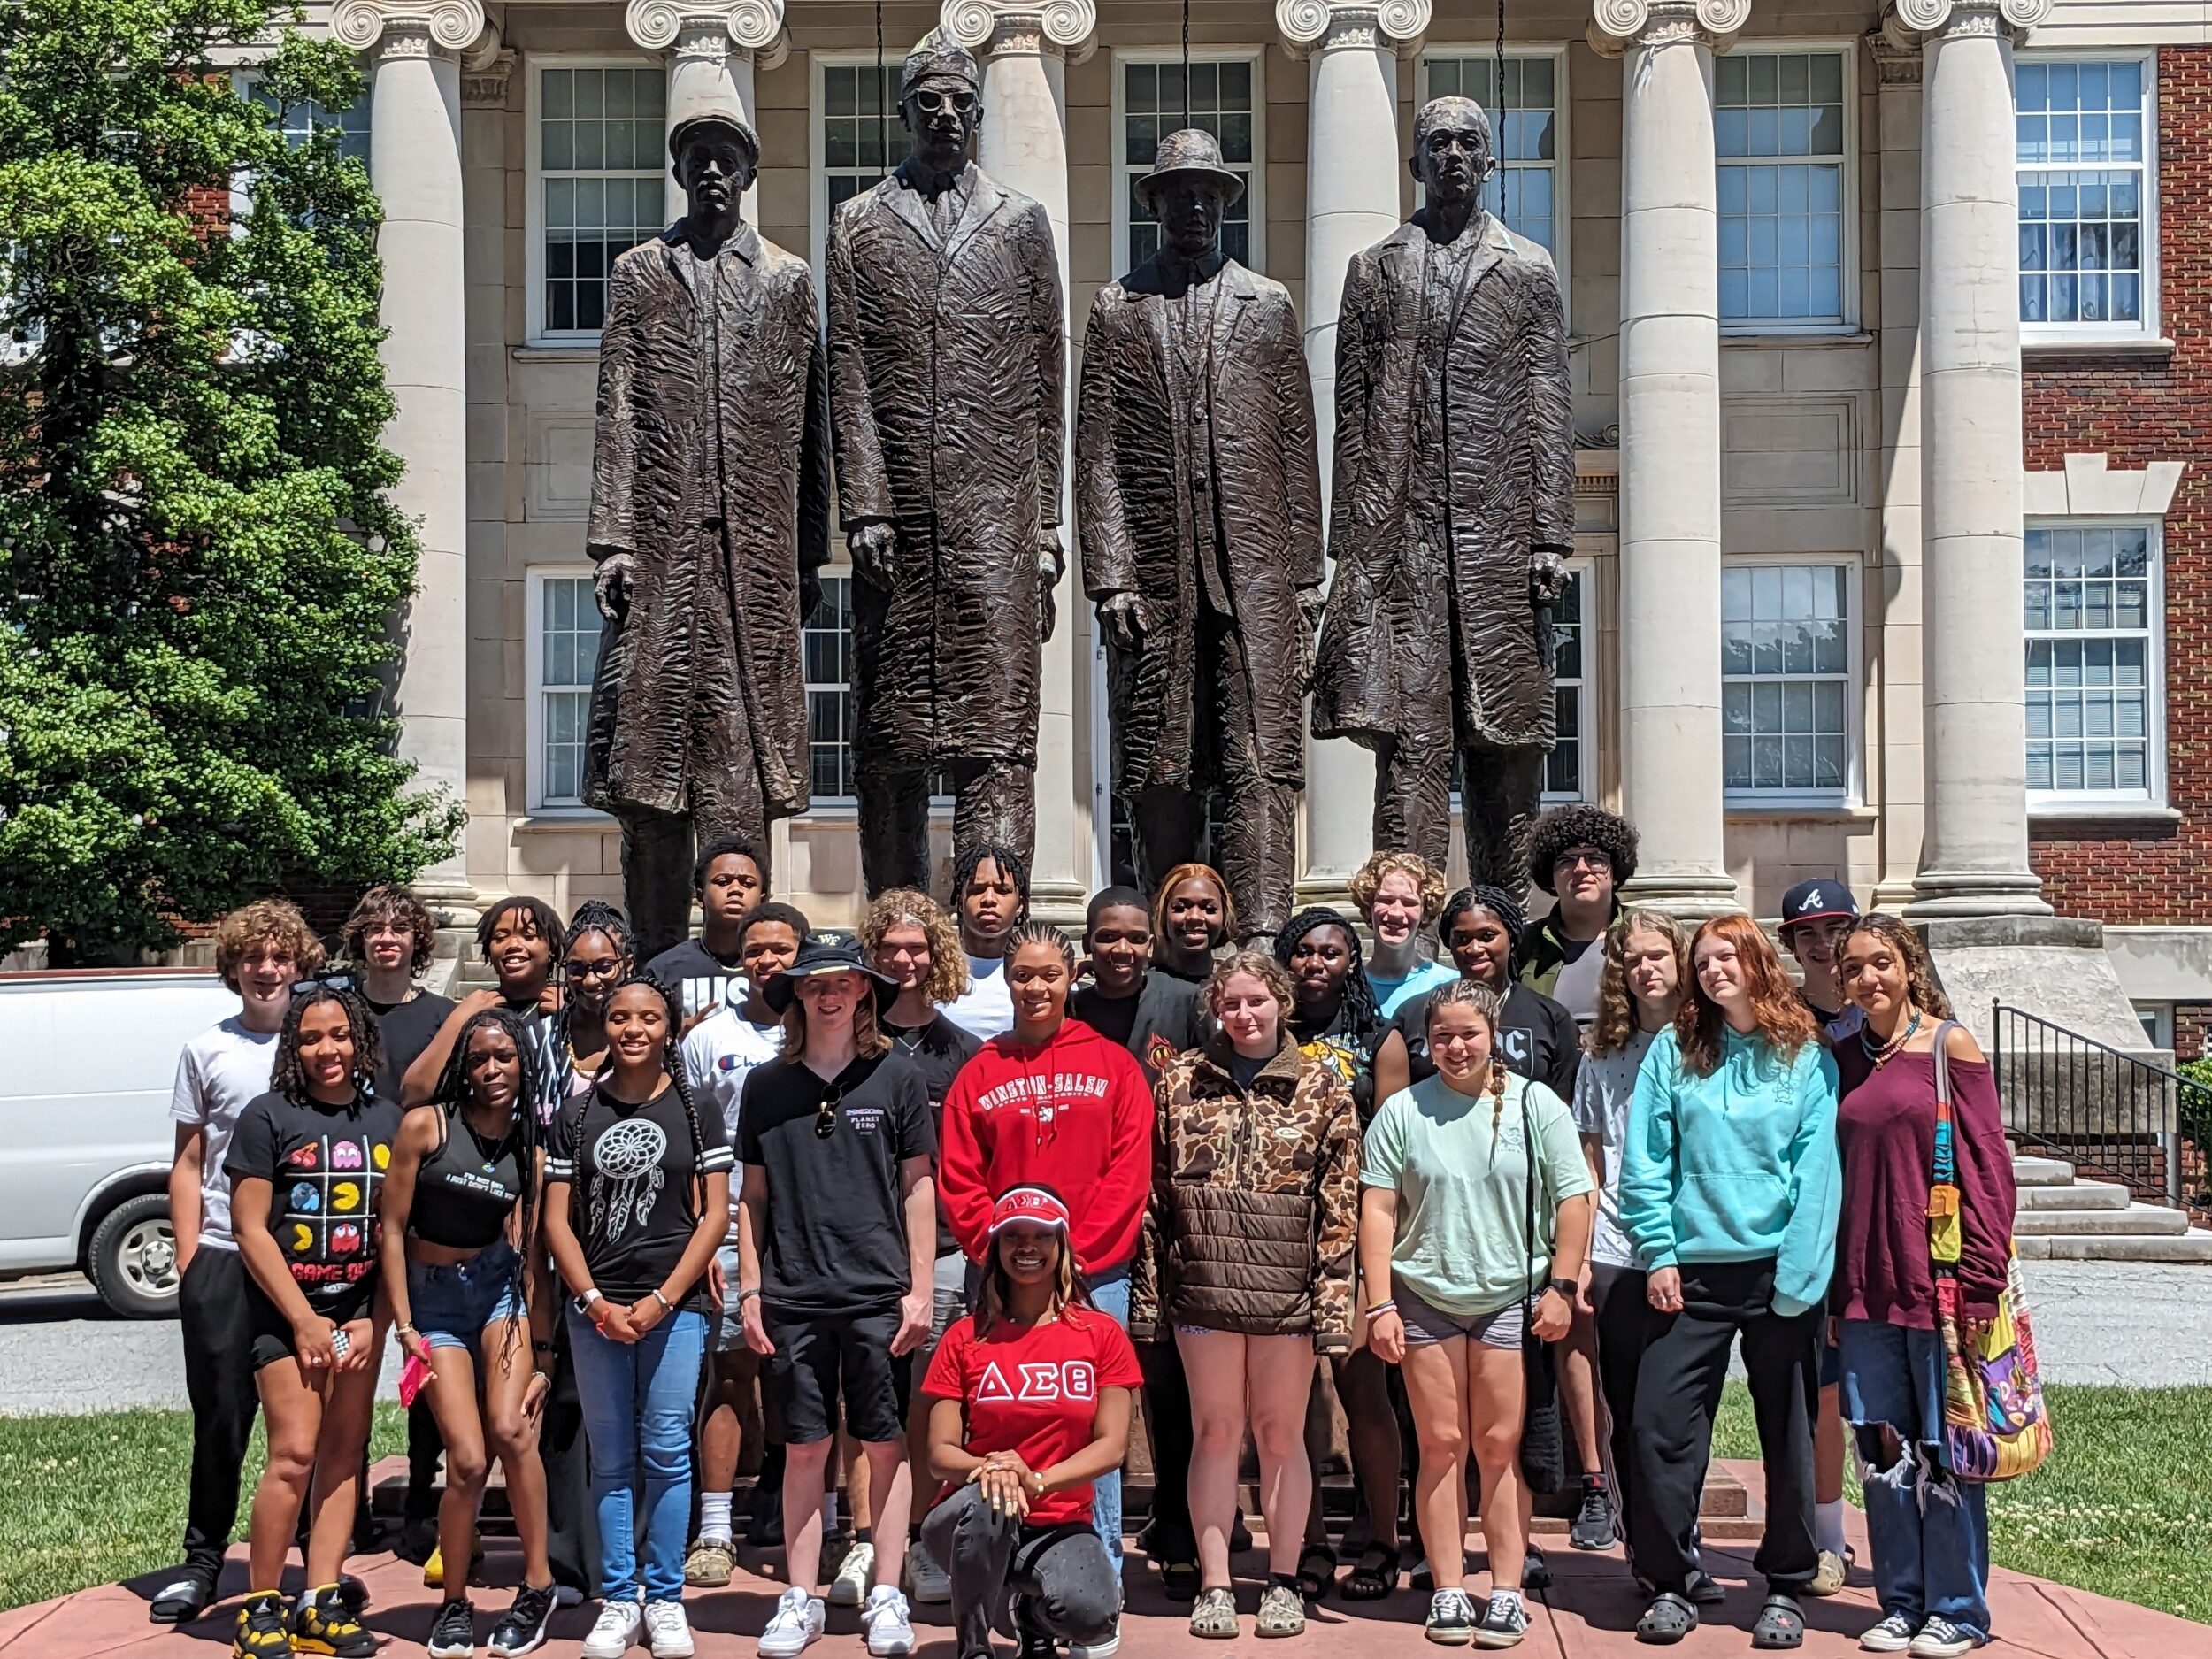 Gates County students at North Carolina Agricultural and Technical State University. They stand in front of statues honoring the Greensboro Four.